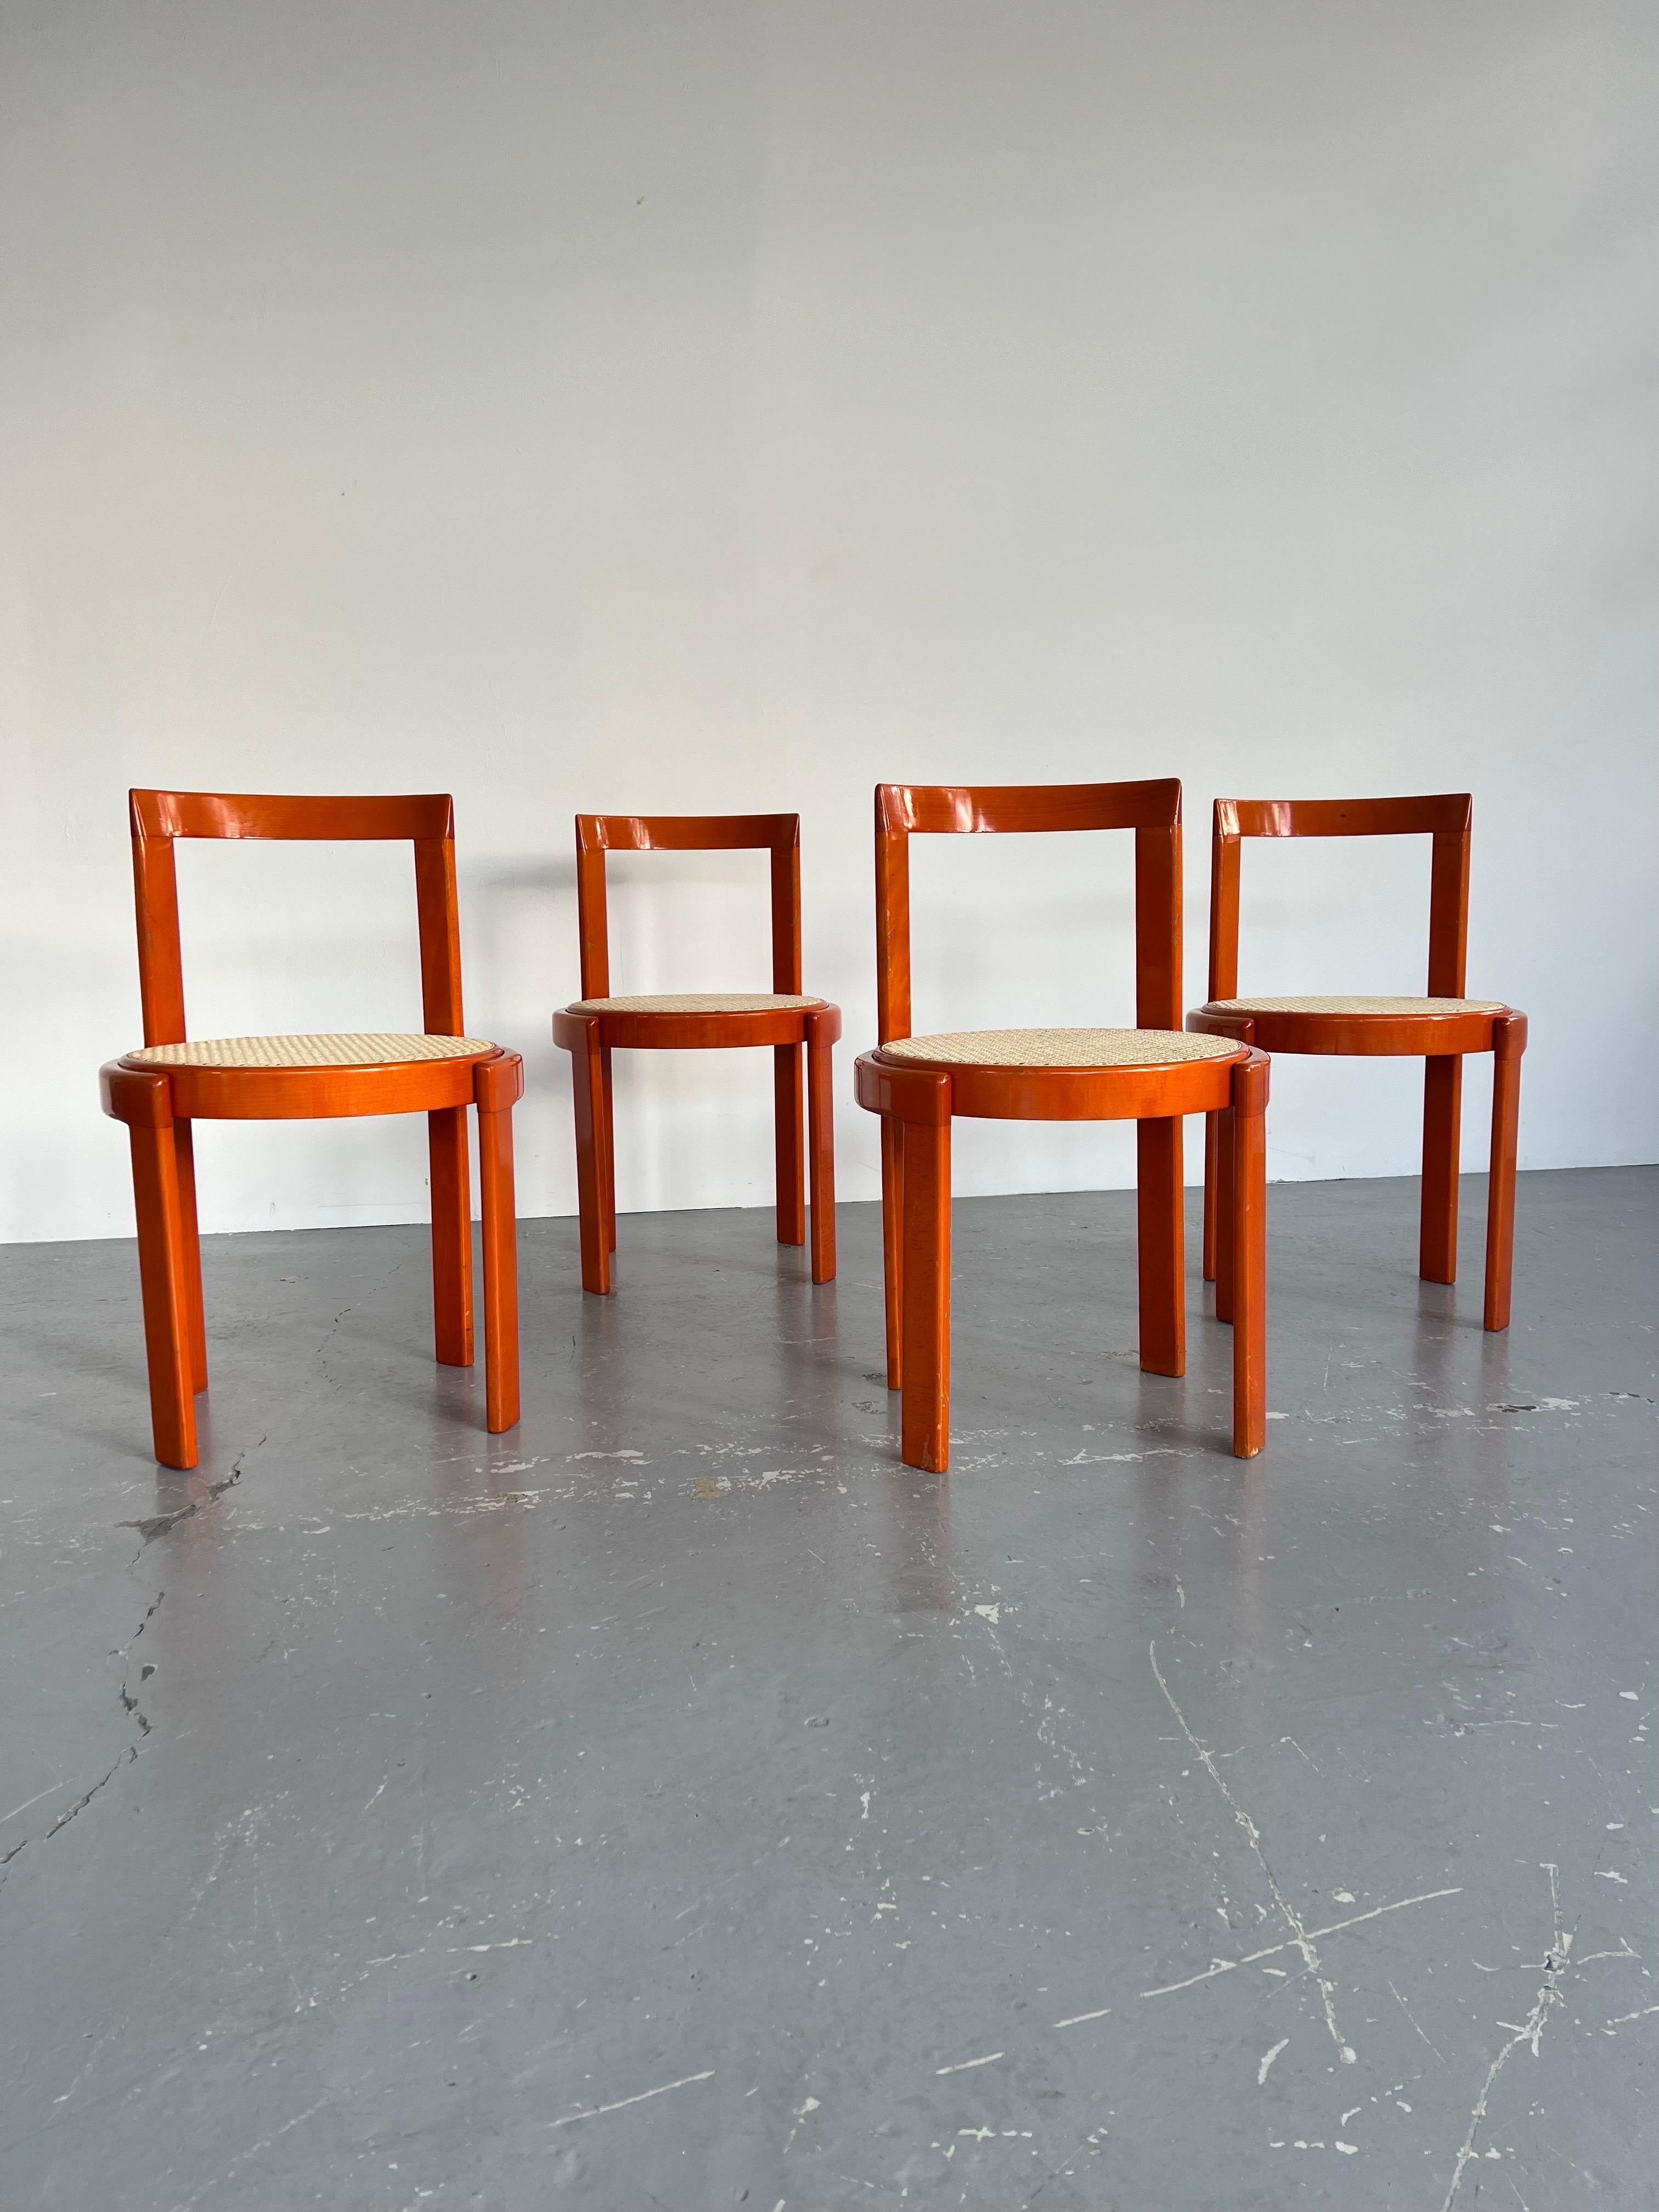 Set of four, Italian modernist dining chairs feature circular, orange stained beech frames with natural caned seats.

A rare and striking post modern dining set, with the “Made In Italy” sticker underneath, the style is very similar to the